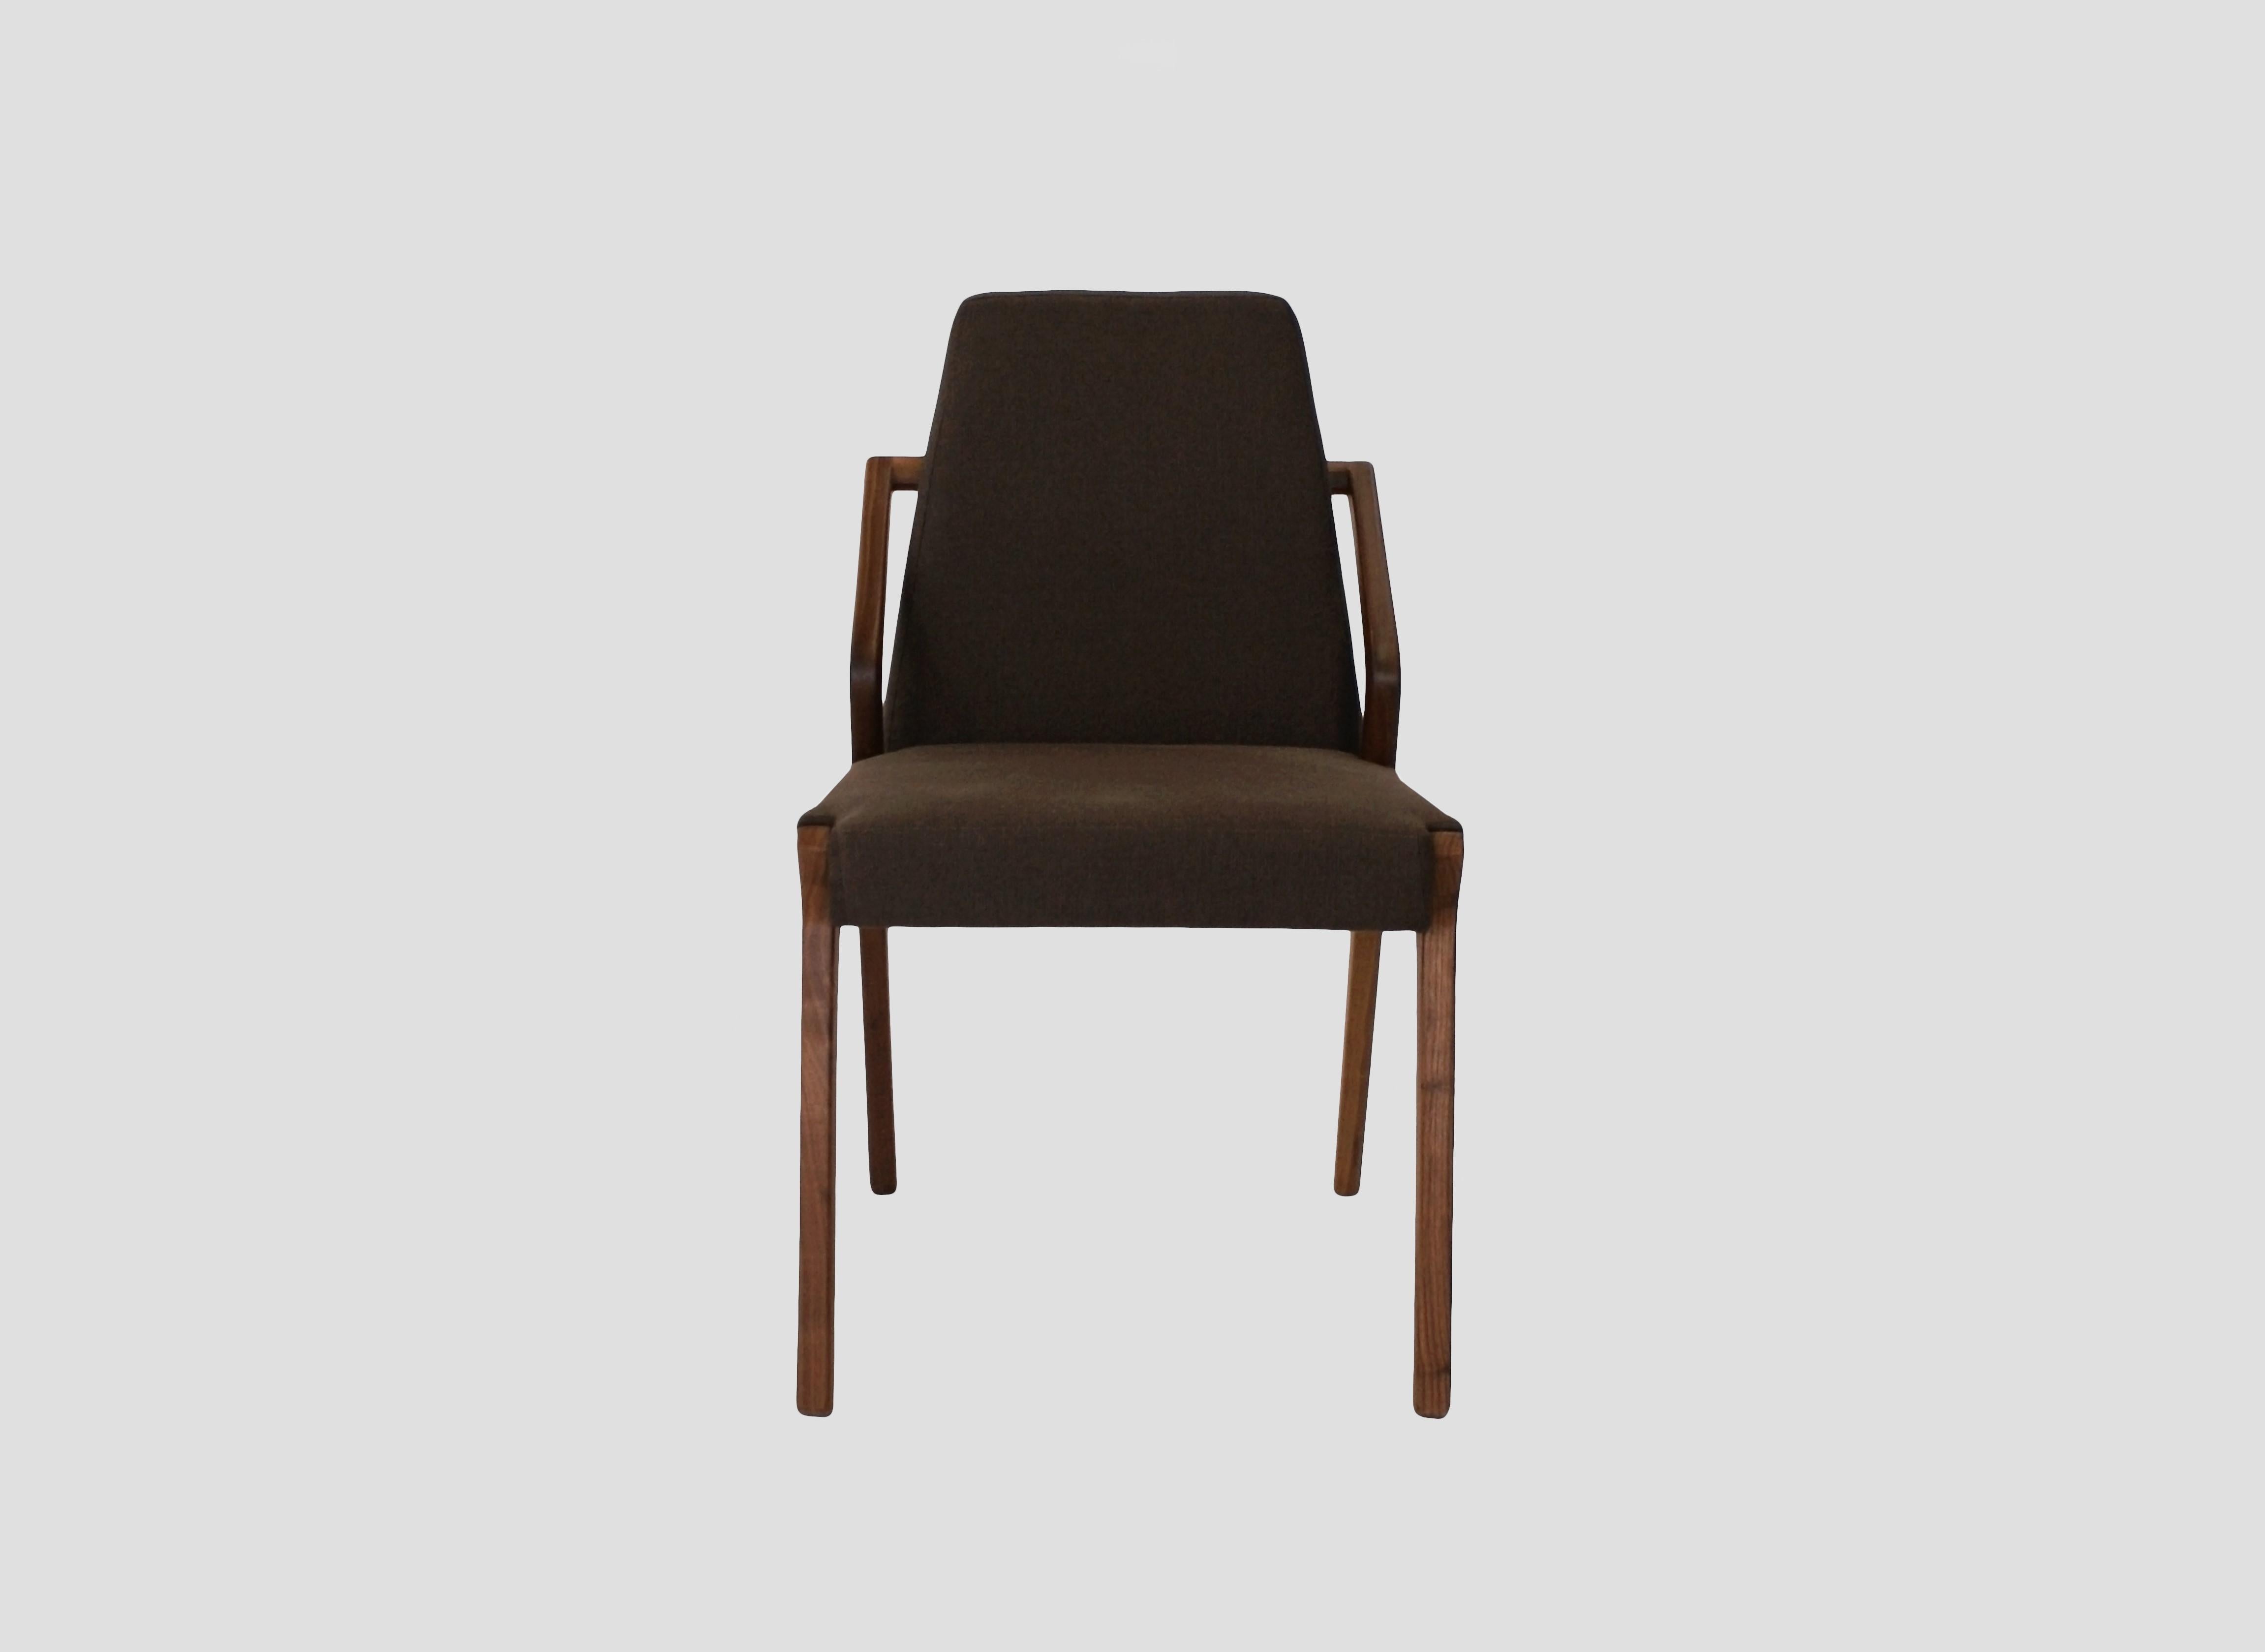 Boomerang dining chair by Arturo Verástegui
Dimensions: D 50 x W 60 x H 90 cm
Materials: walnut wood, fabric.

Dining chair made of solid holm walnut with fabric or leather.

Arturo Verástegui has been the director and founder of BREUER since